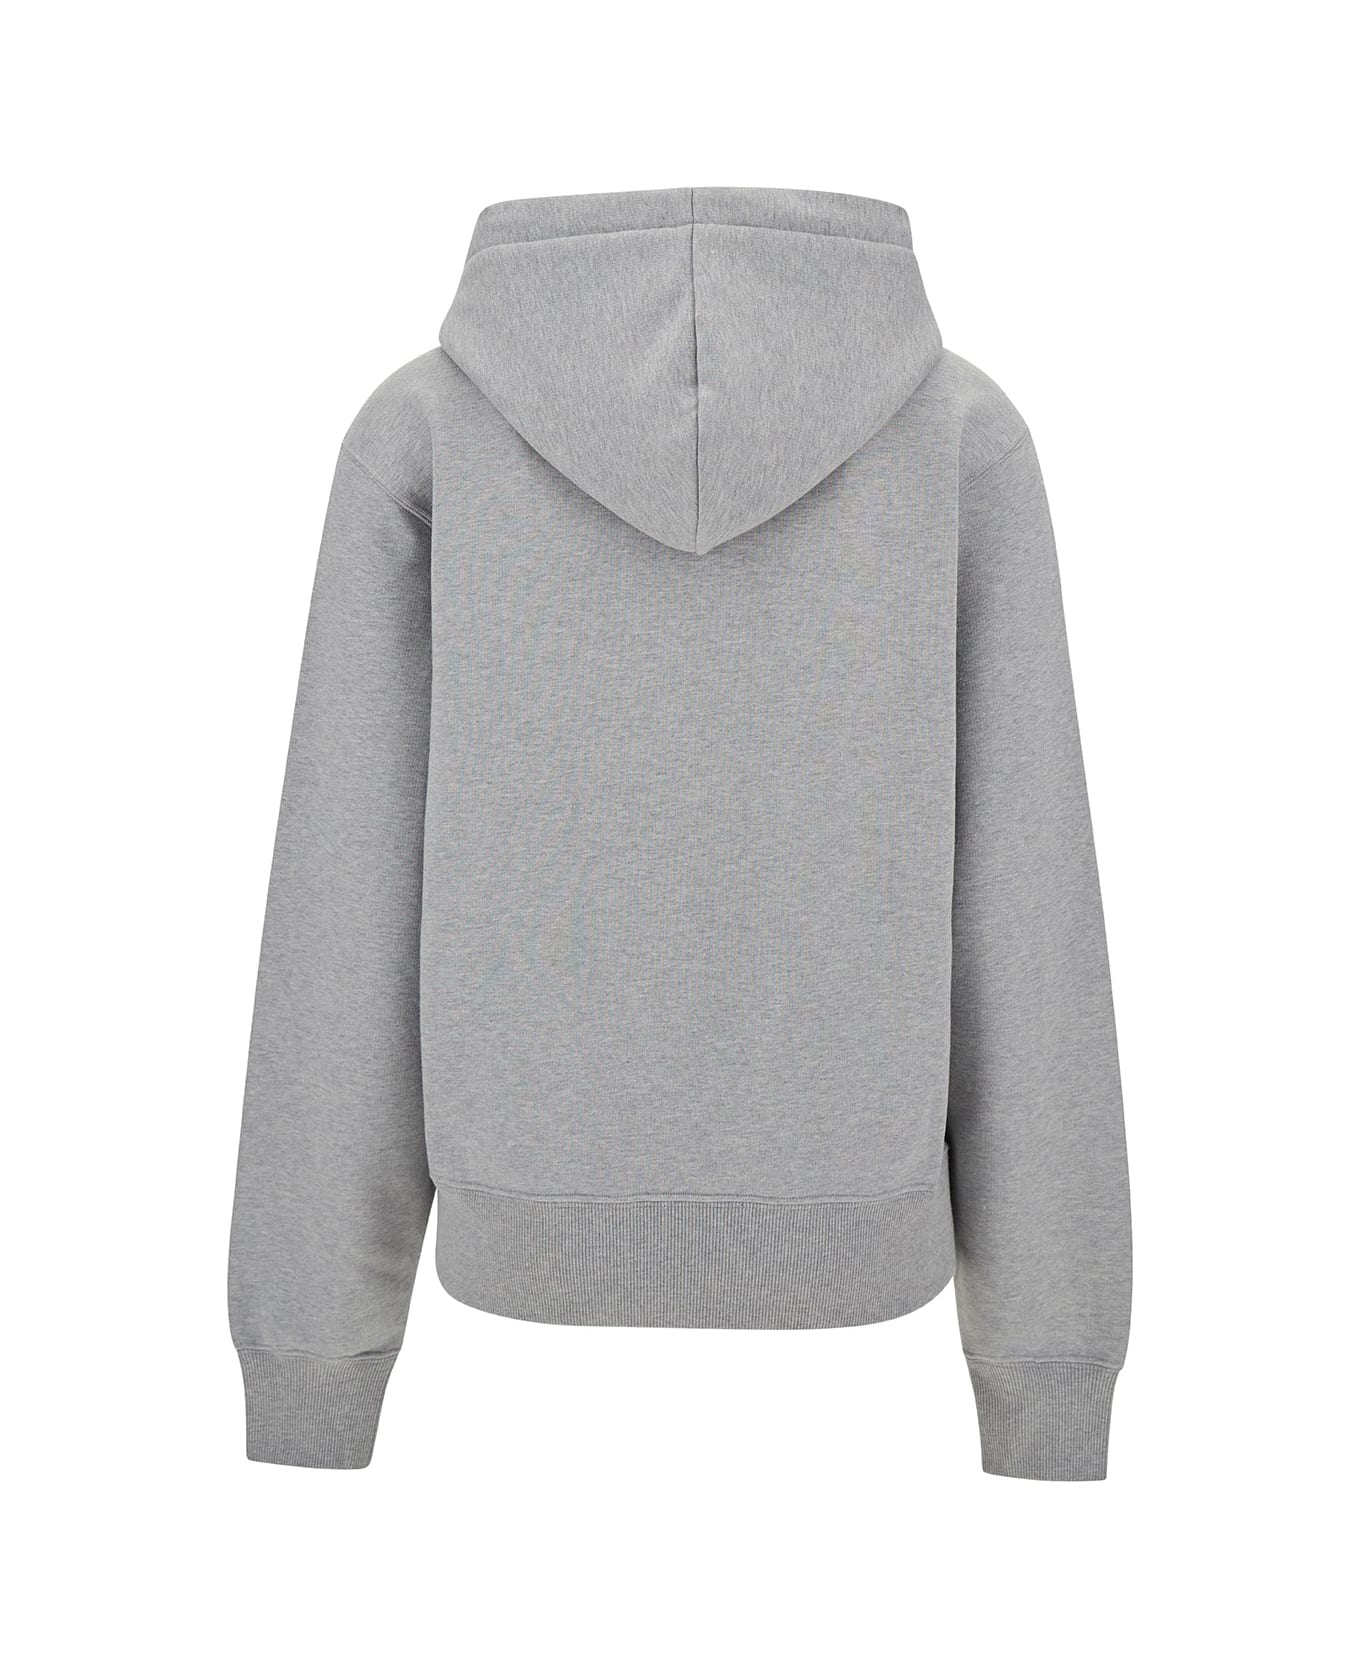 Saint Laurent Grey Hoodie With Cassandre Embroidery In Cotton Woman - Grey ニットウェア